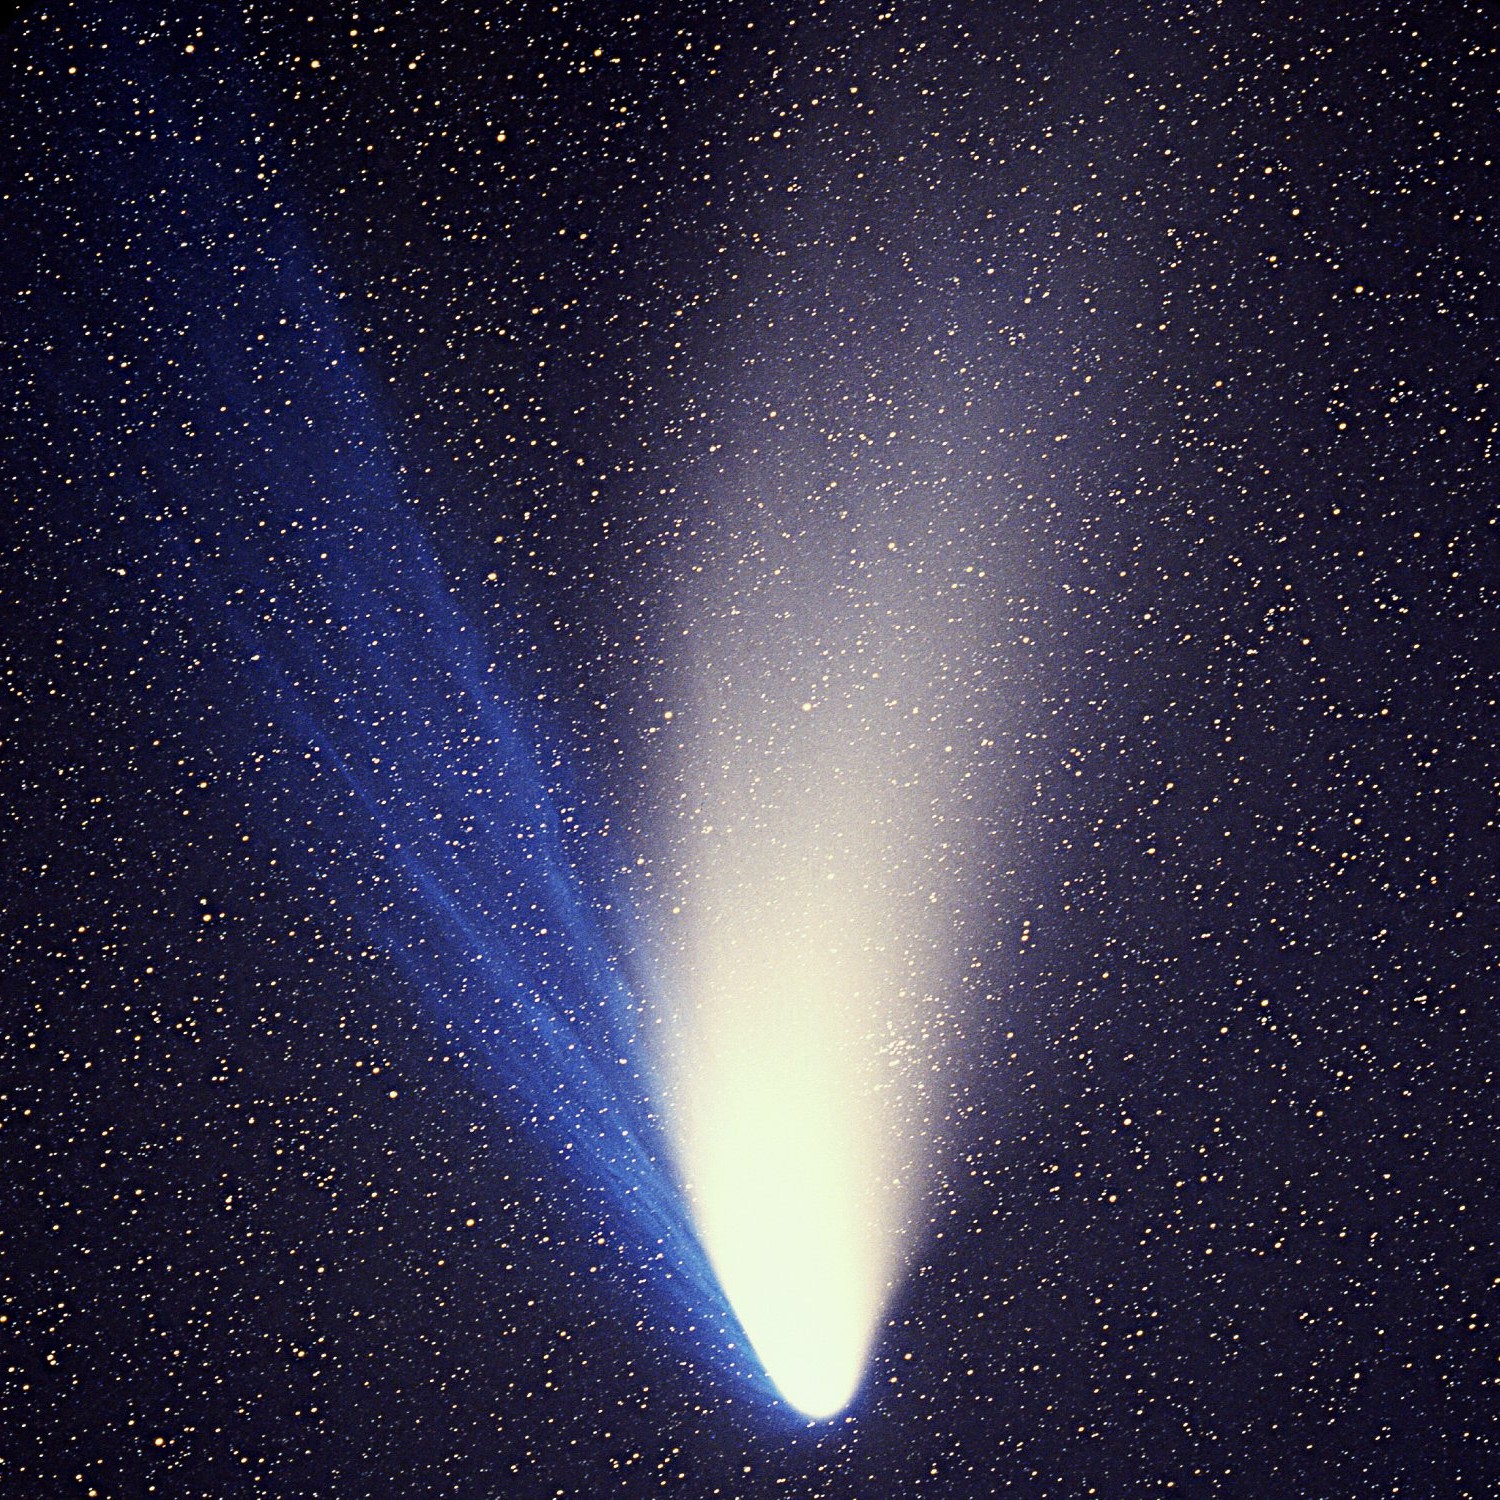 Image of a typical comet with a wide white tail and a second blue tail tilted 30 degrees counter-clockwise to the white tail.